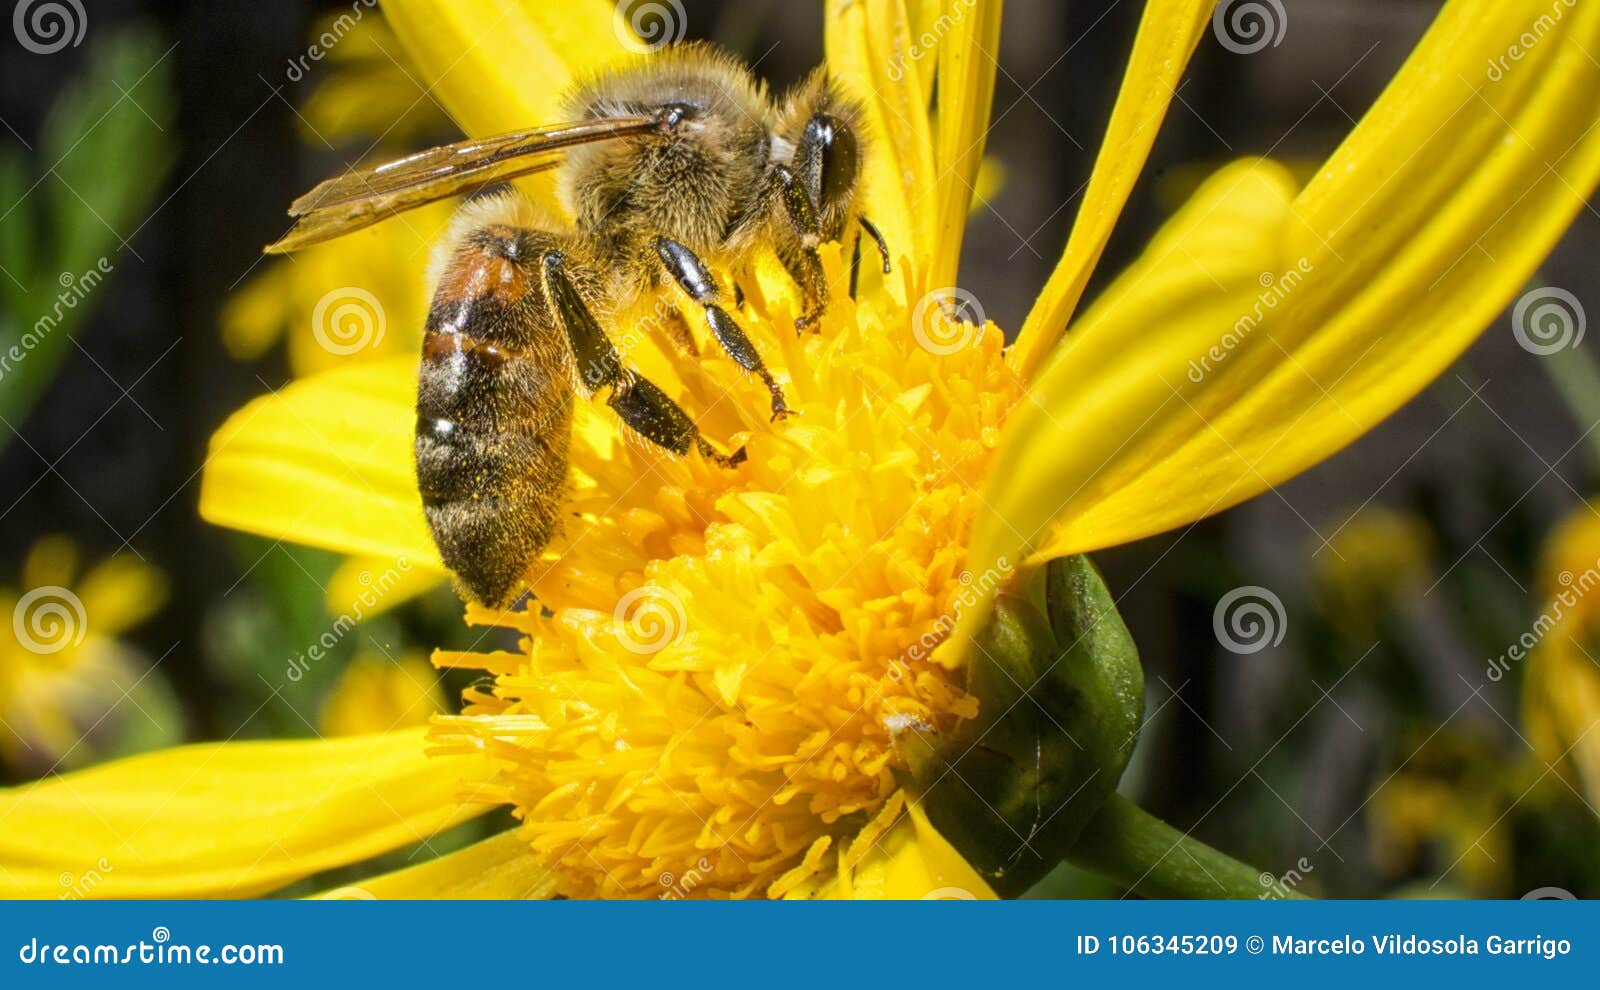 worker bee working on pollination